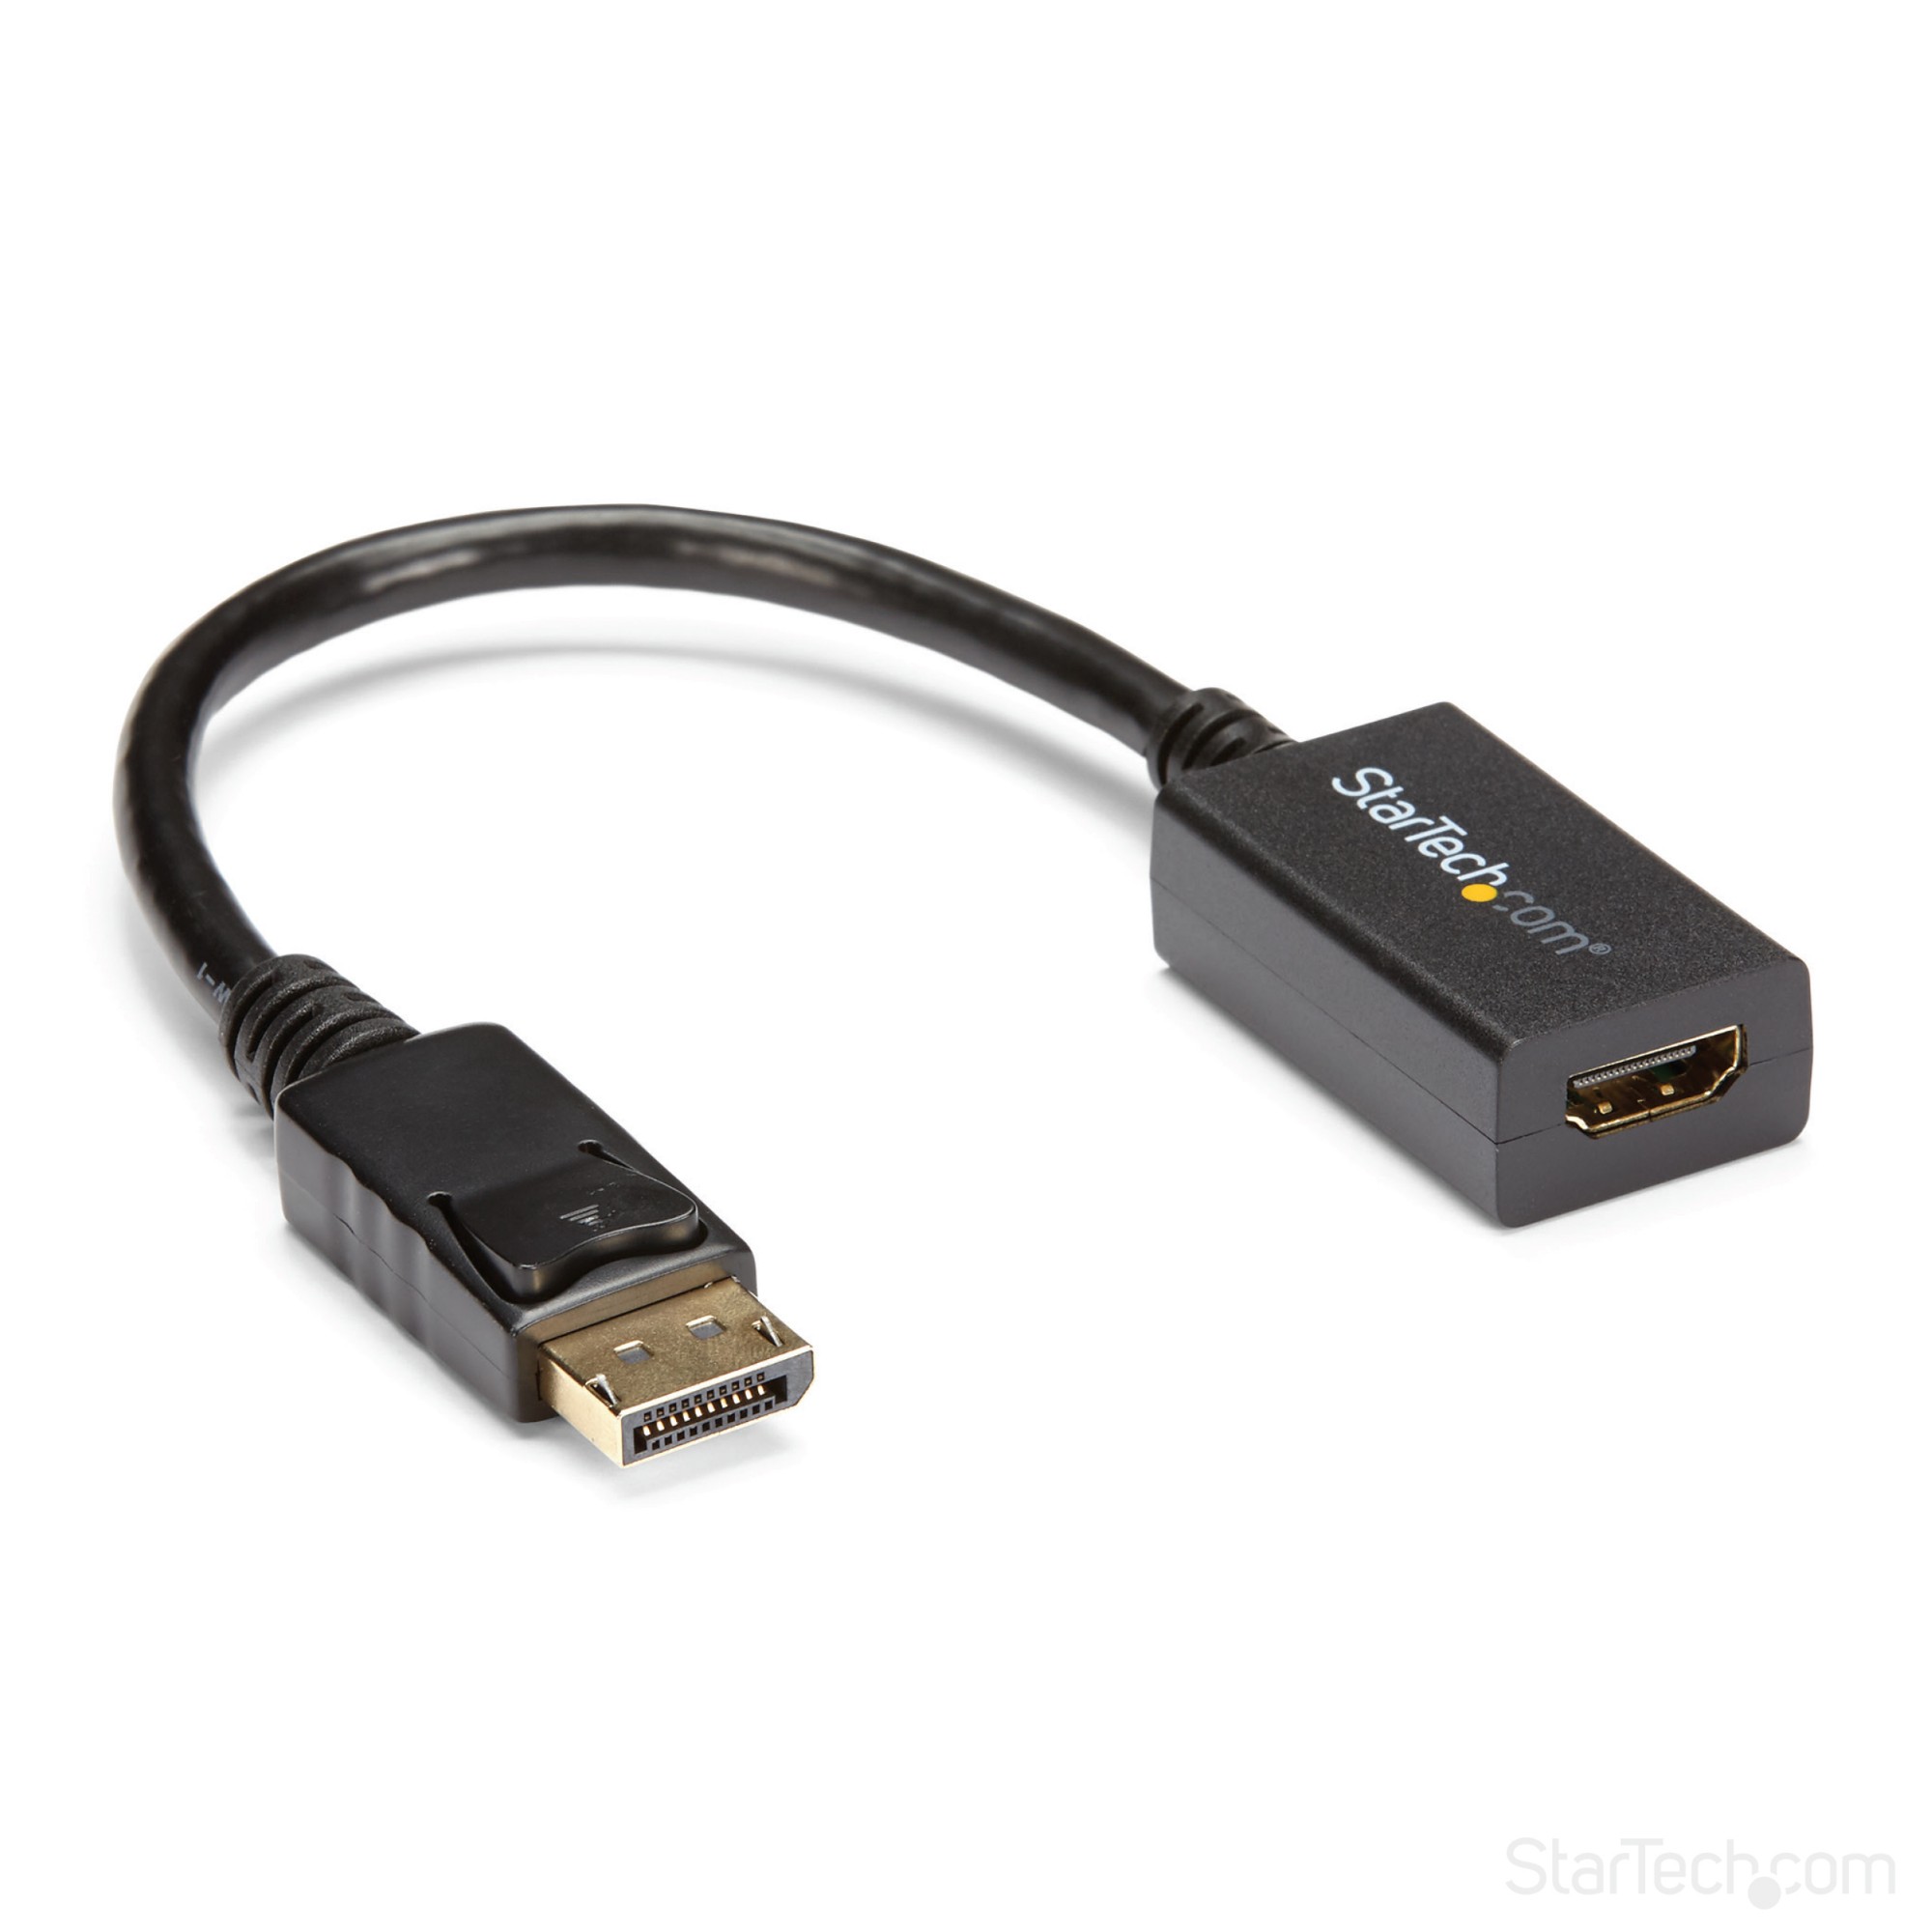 StarTech.com DisplayPort to HDMI Adapter - DP 1.2 to HDMI Video .